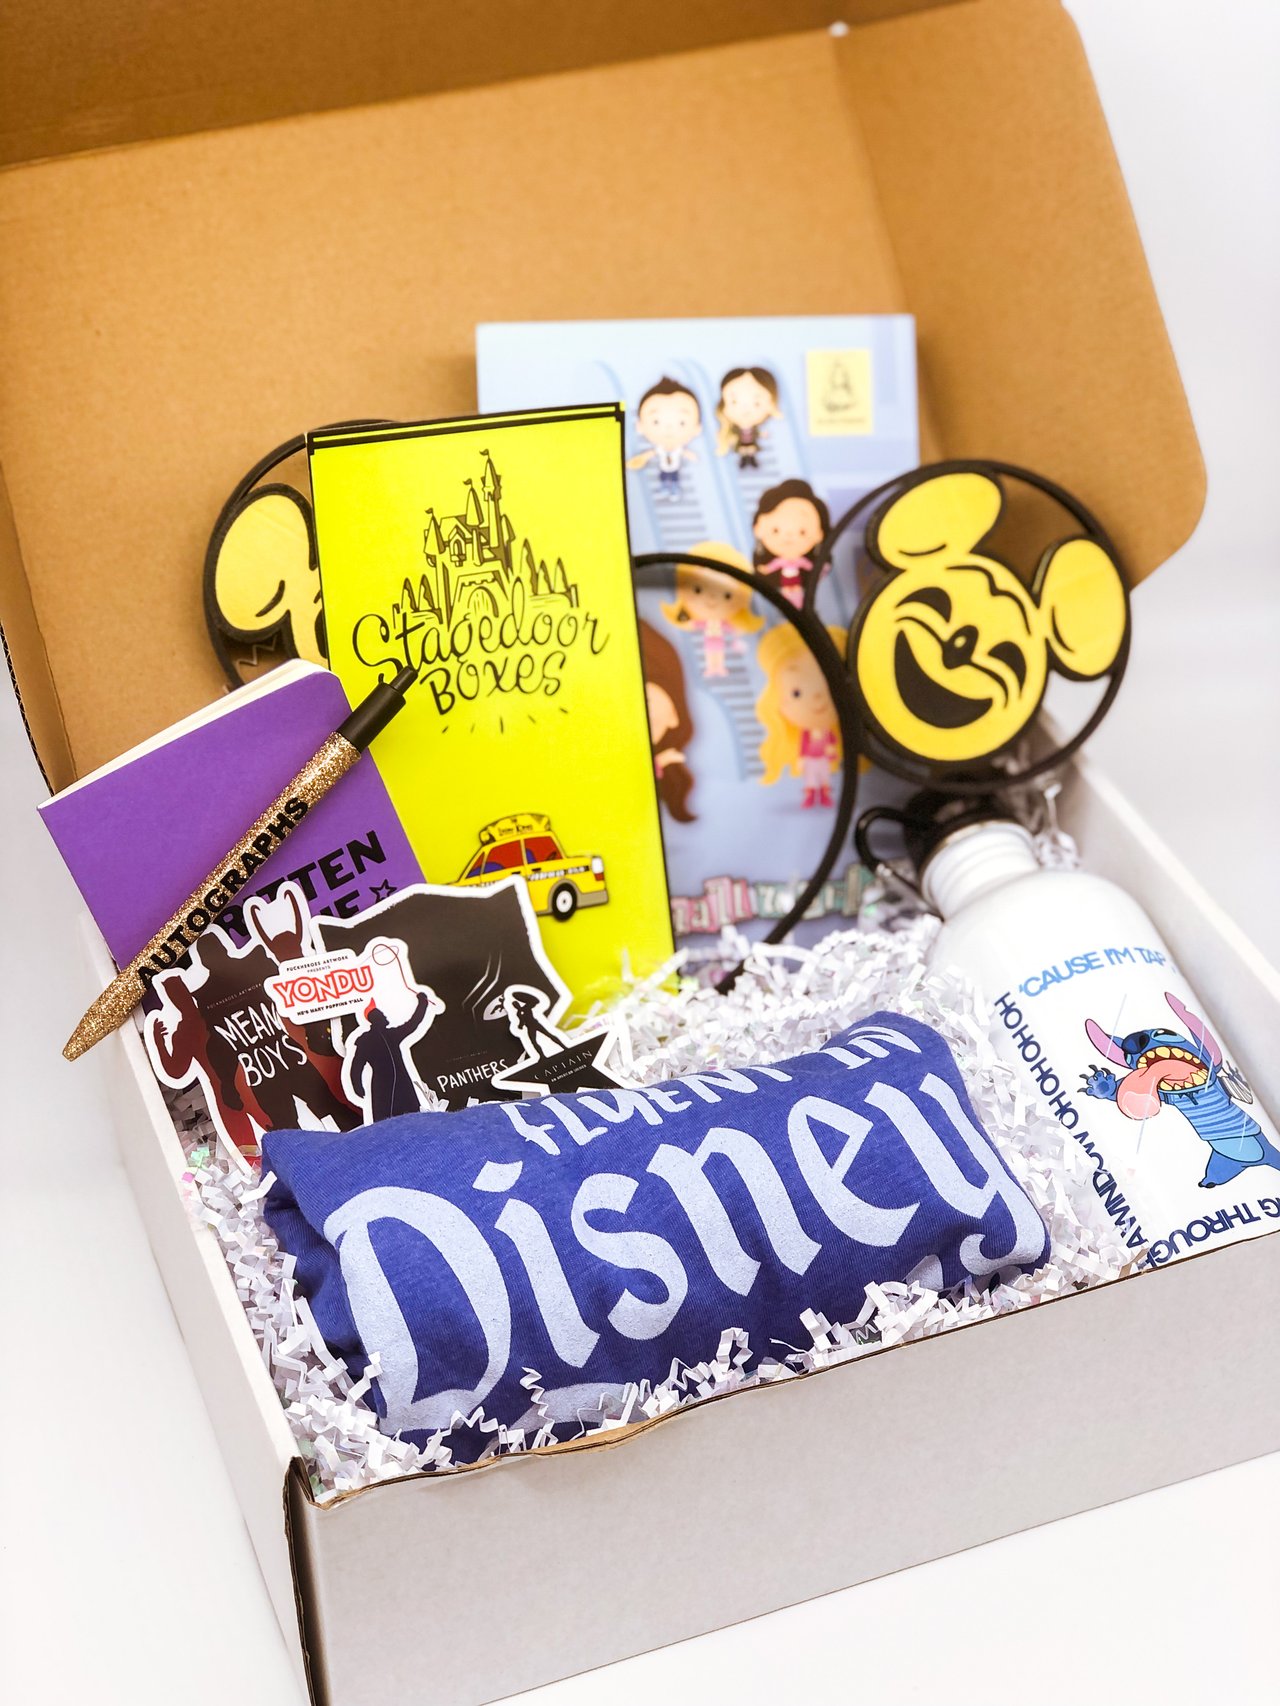 Disney and Broadway themed merch